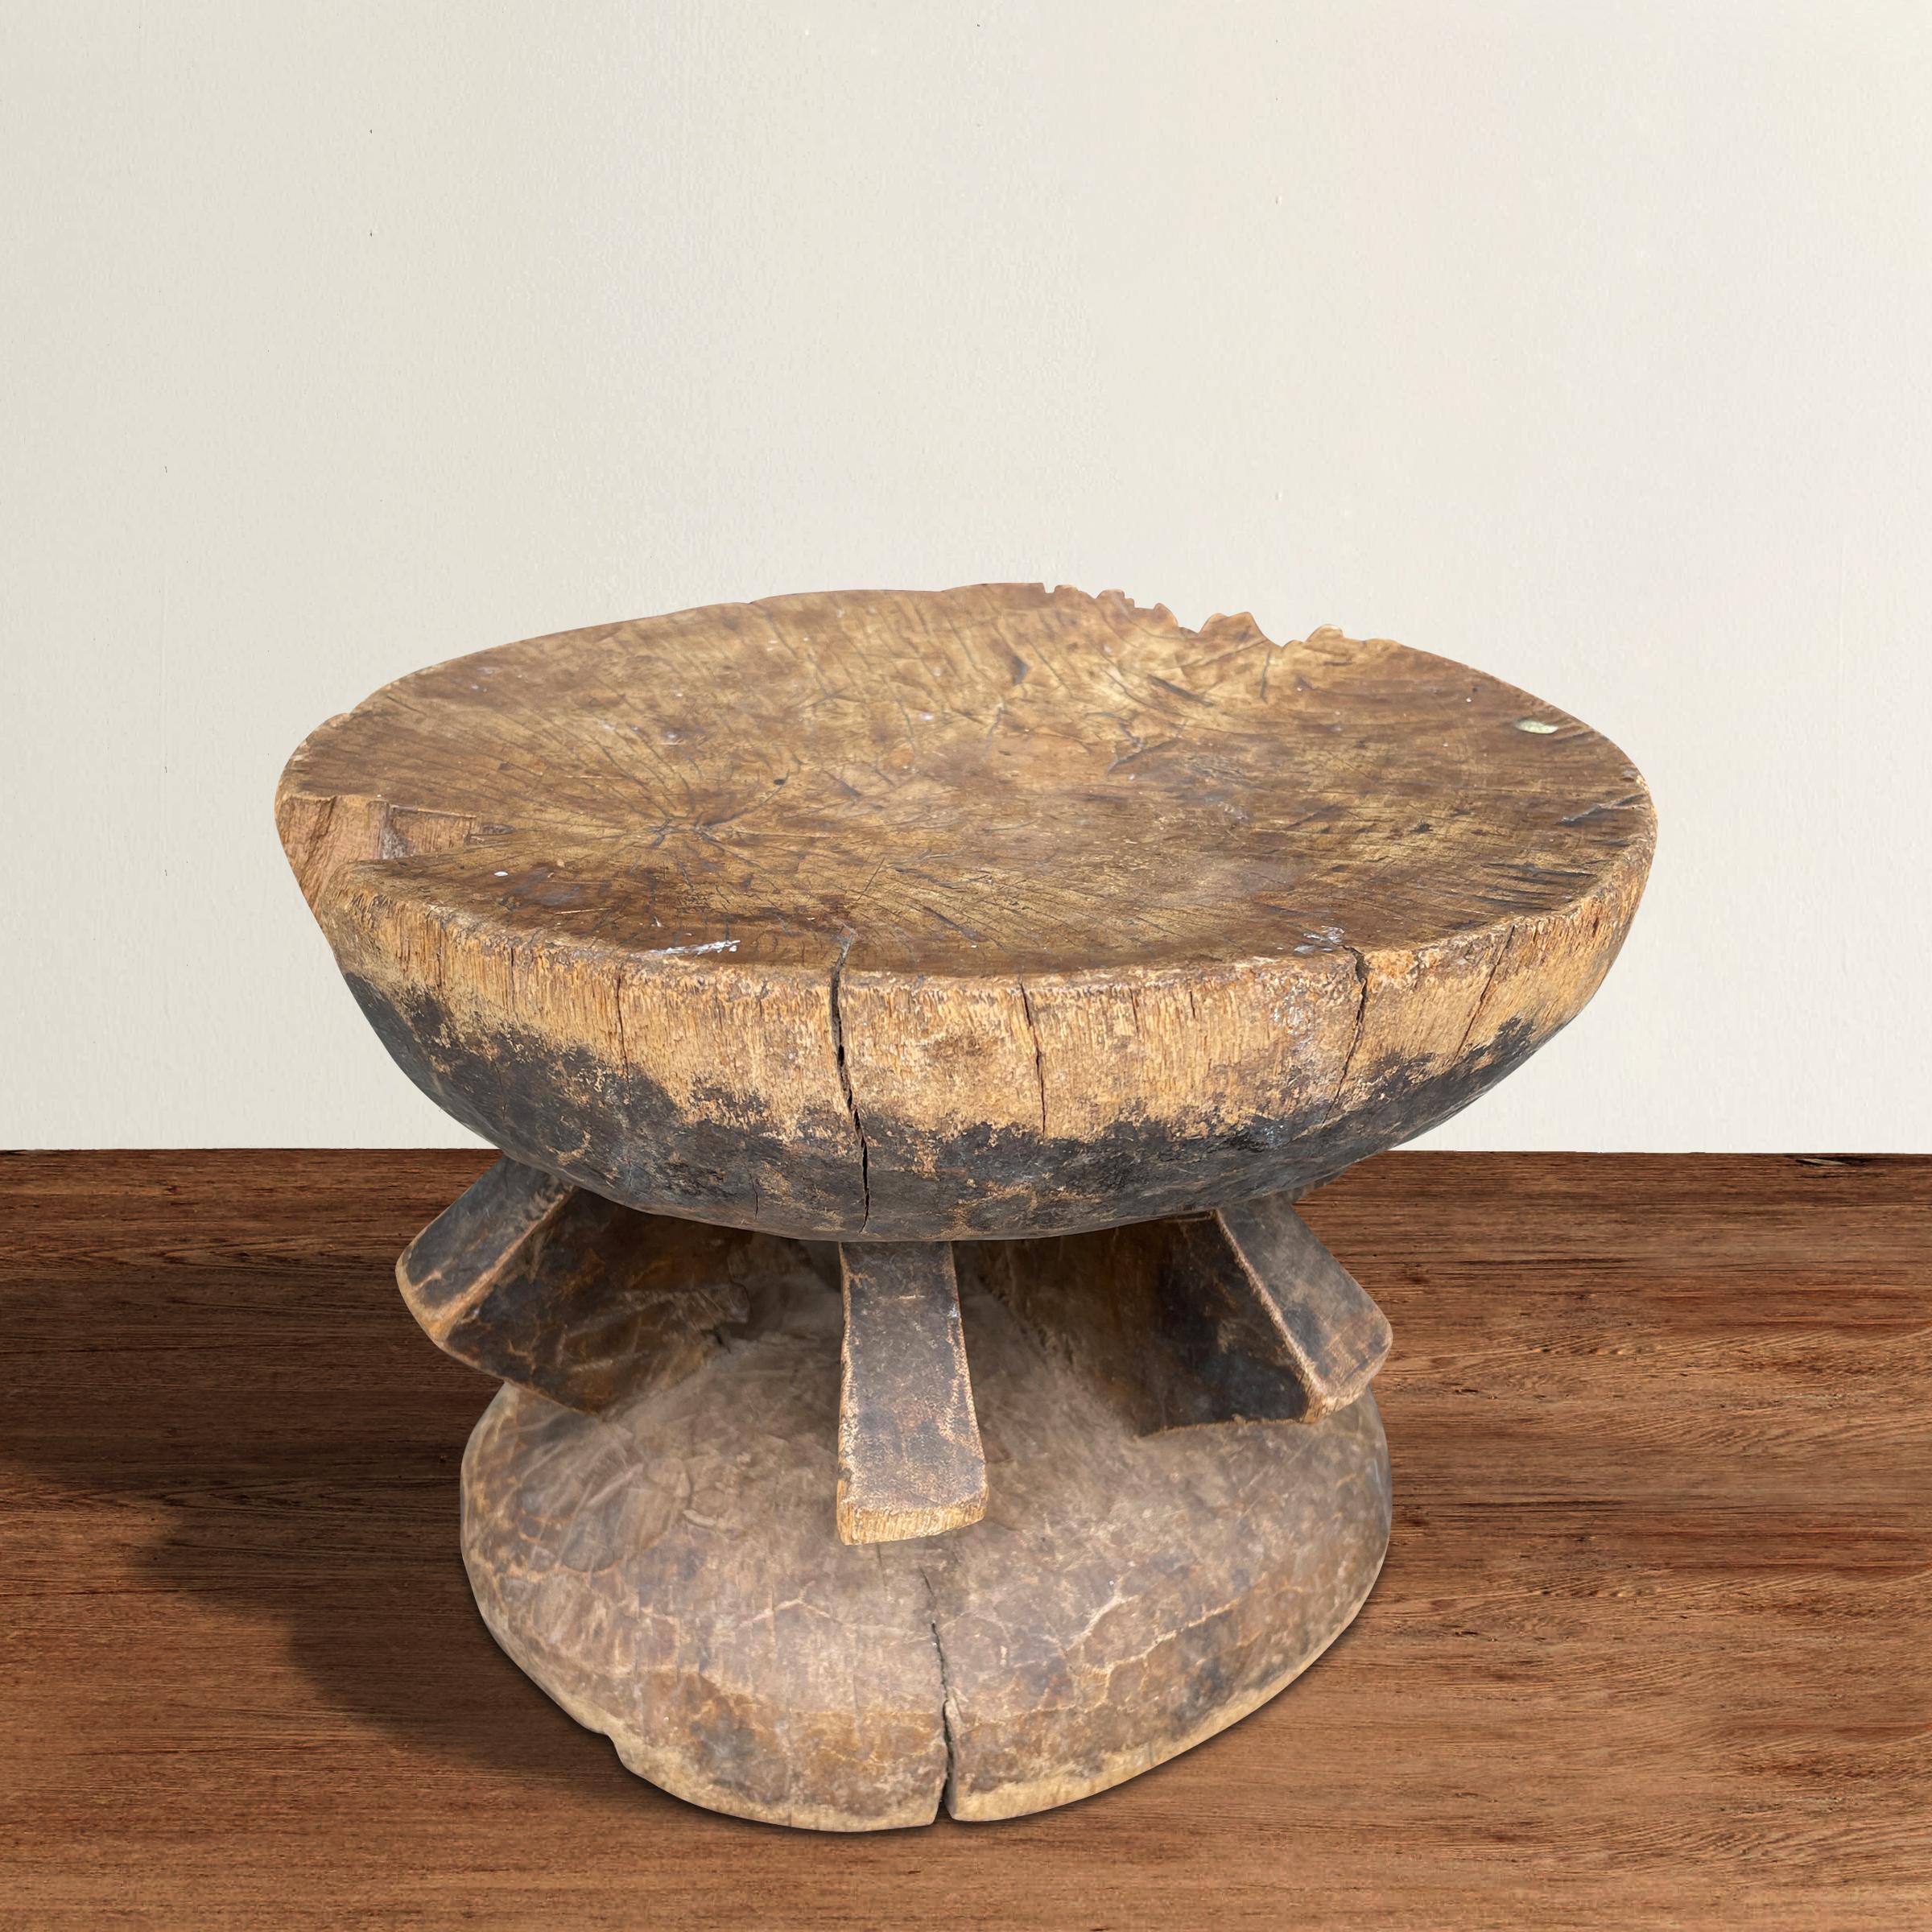 A fantastic and bold Dogon stool carved from one piece of wood, and with several geometric 'legs' supporting a half-round seat and base, and with a wonderful patina only time can bestow. Perfect as a small perch next to your favorite armchair, or as